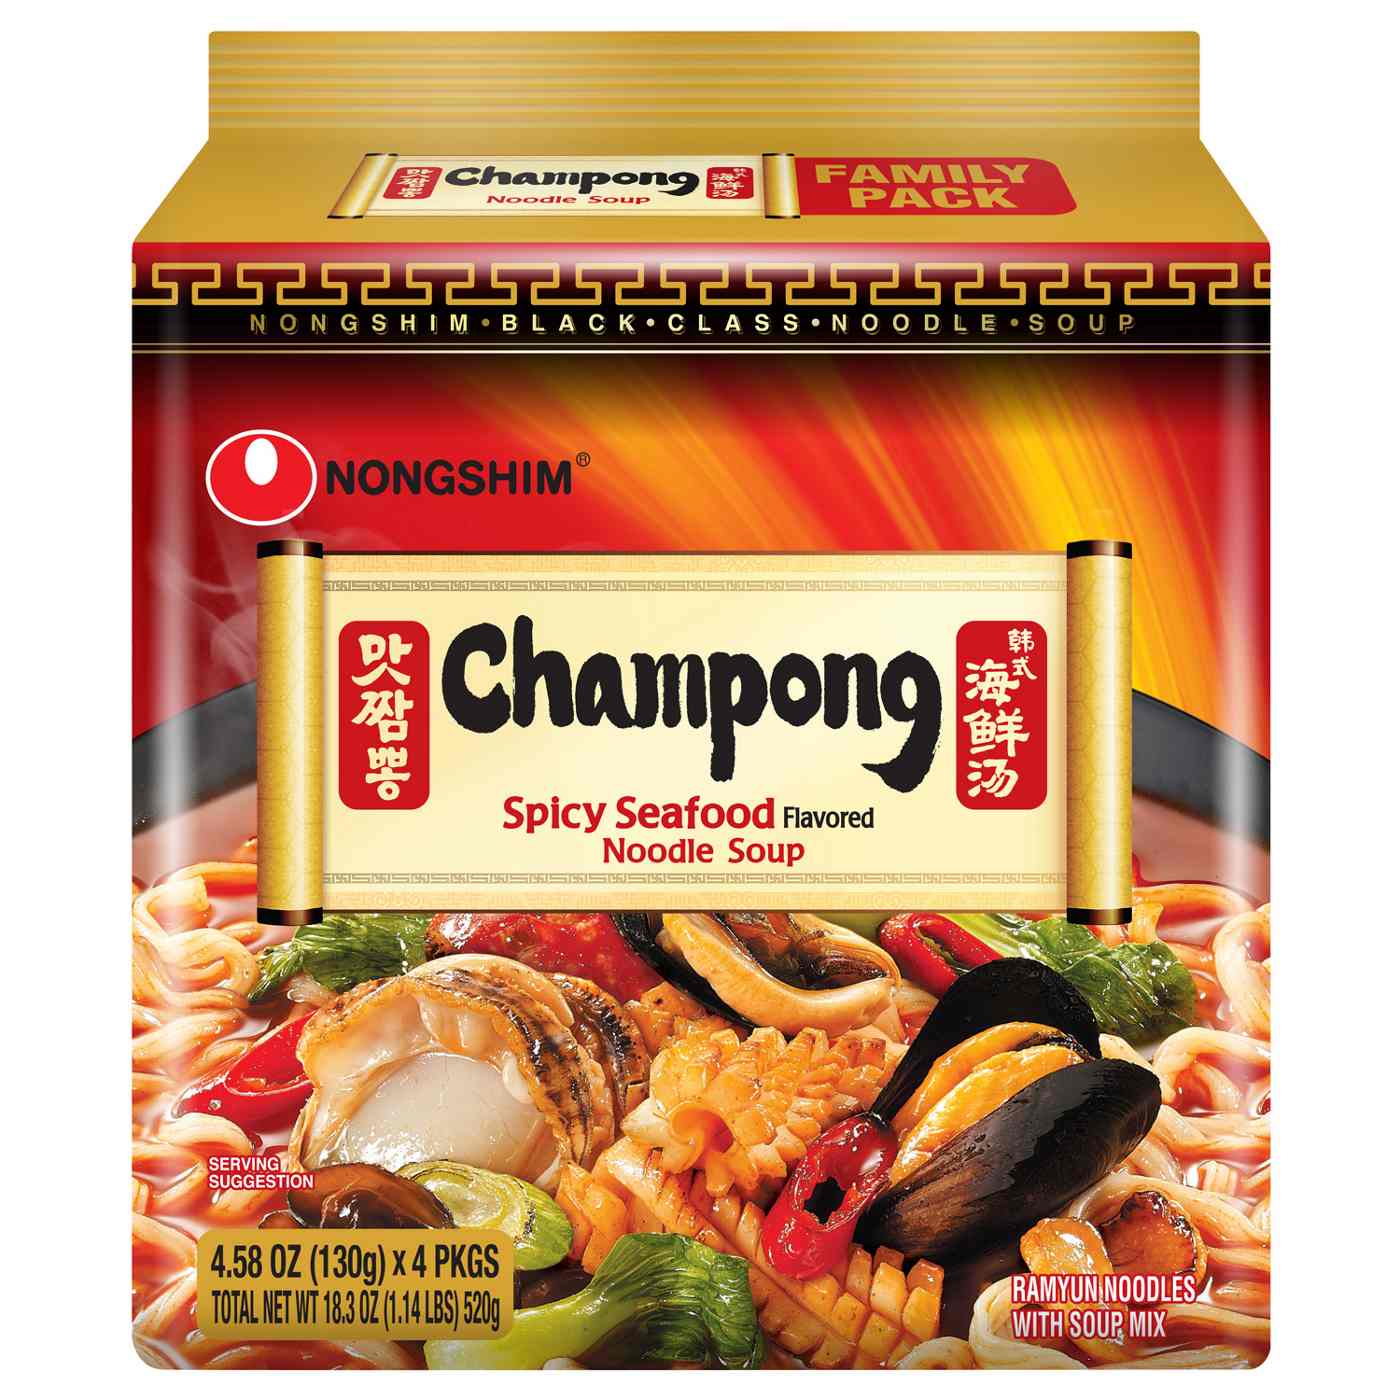 Nongshim Champong Spicy Seafood Noodle Soup Family Pack; image 1 of 2